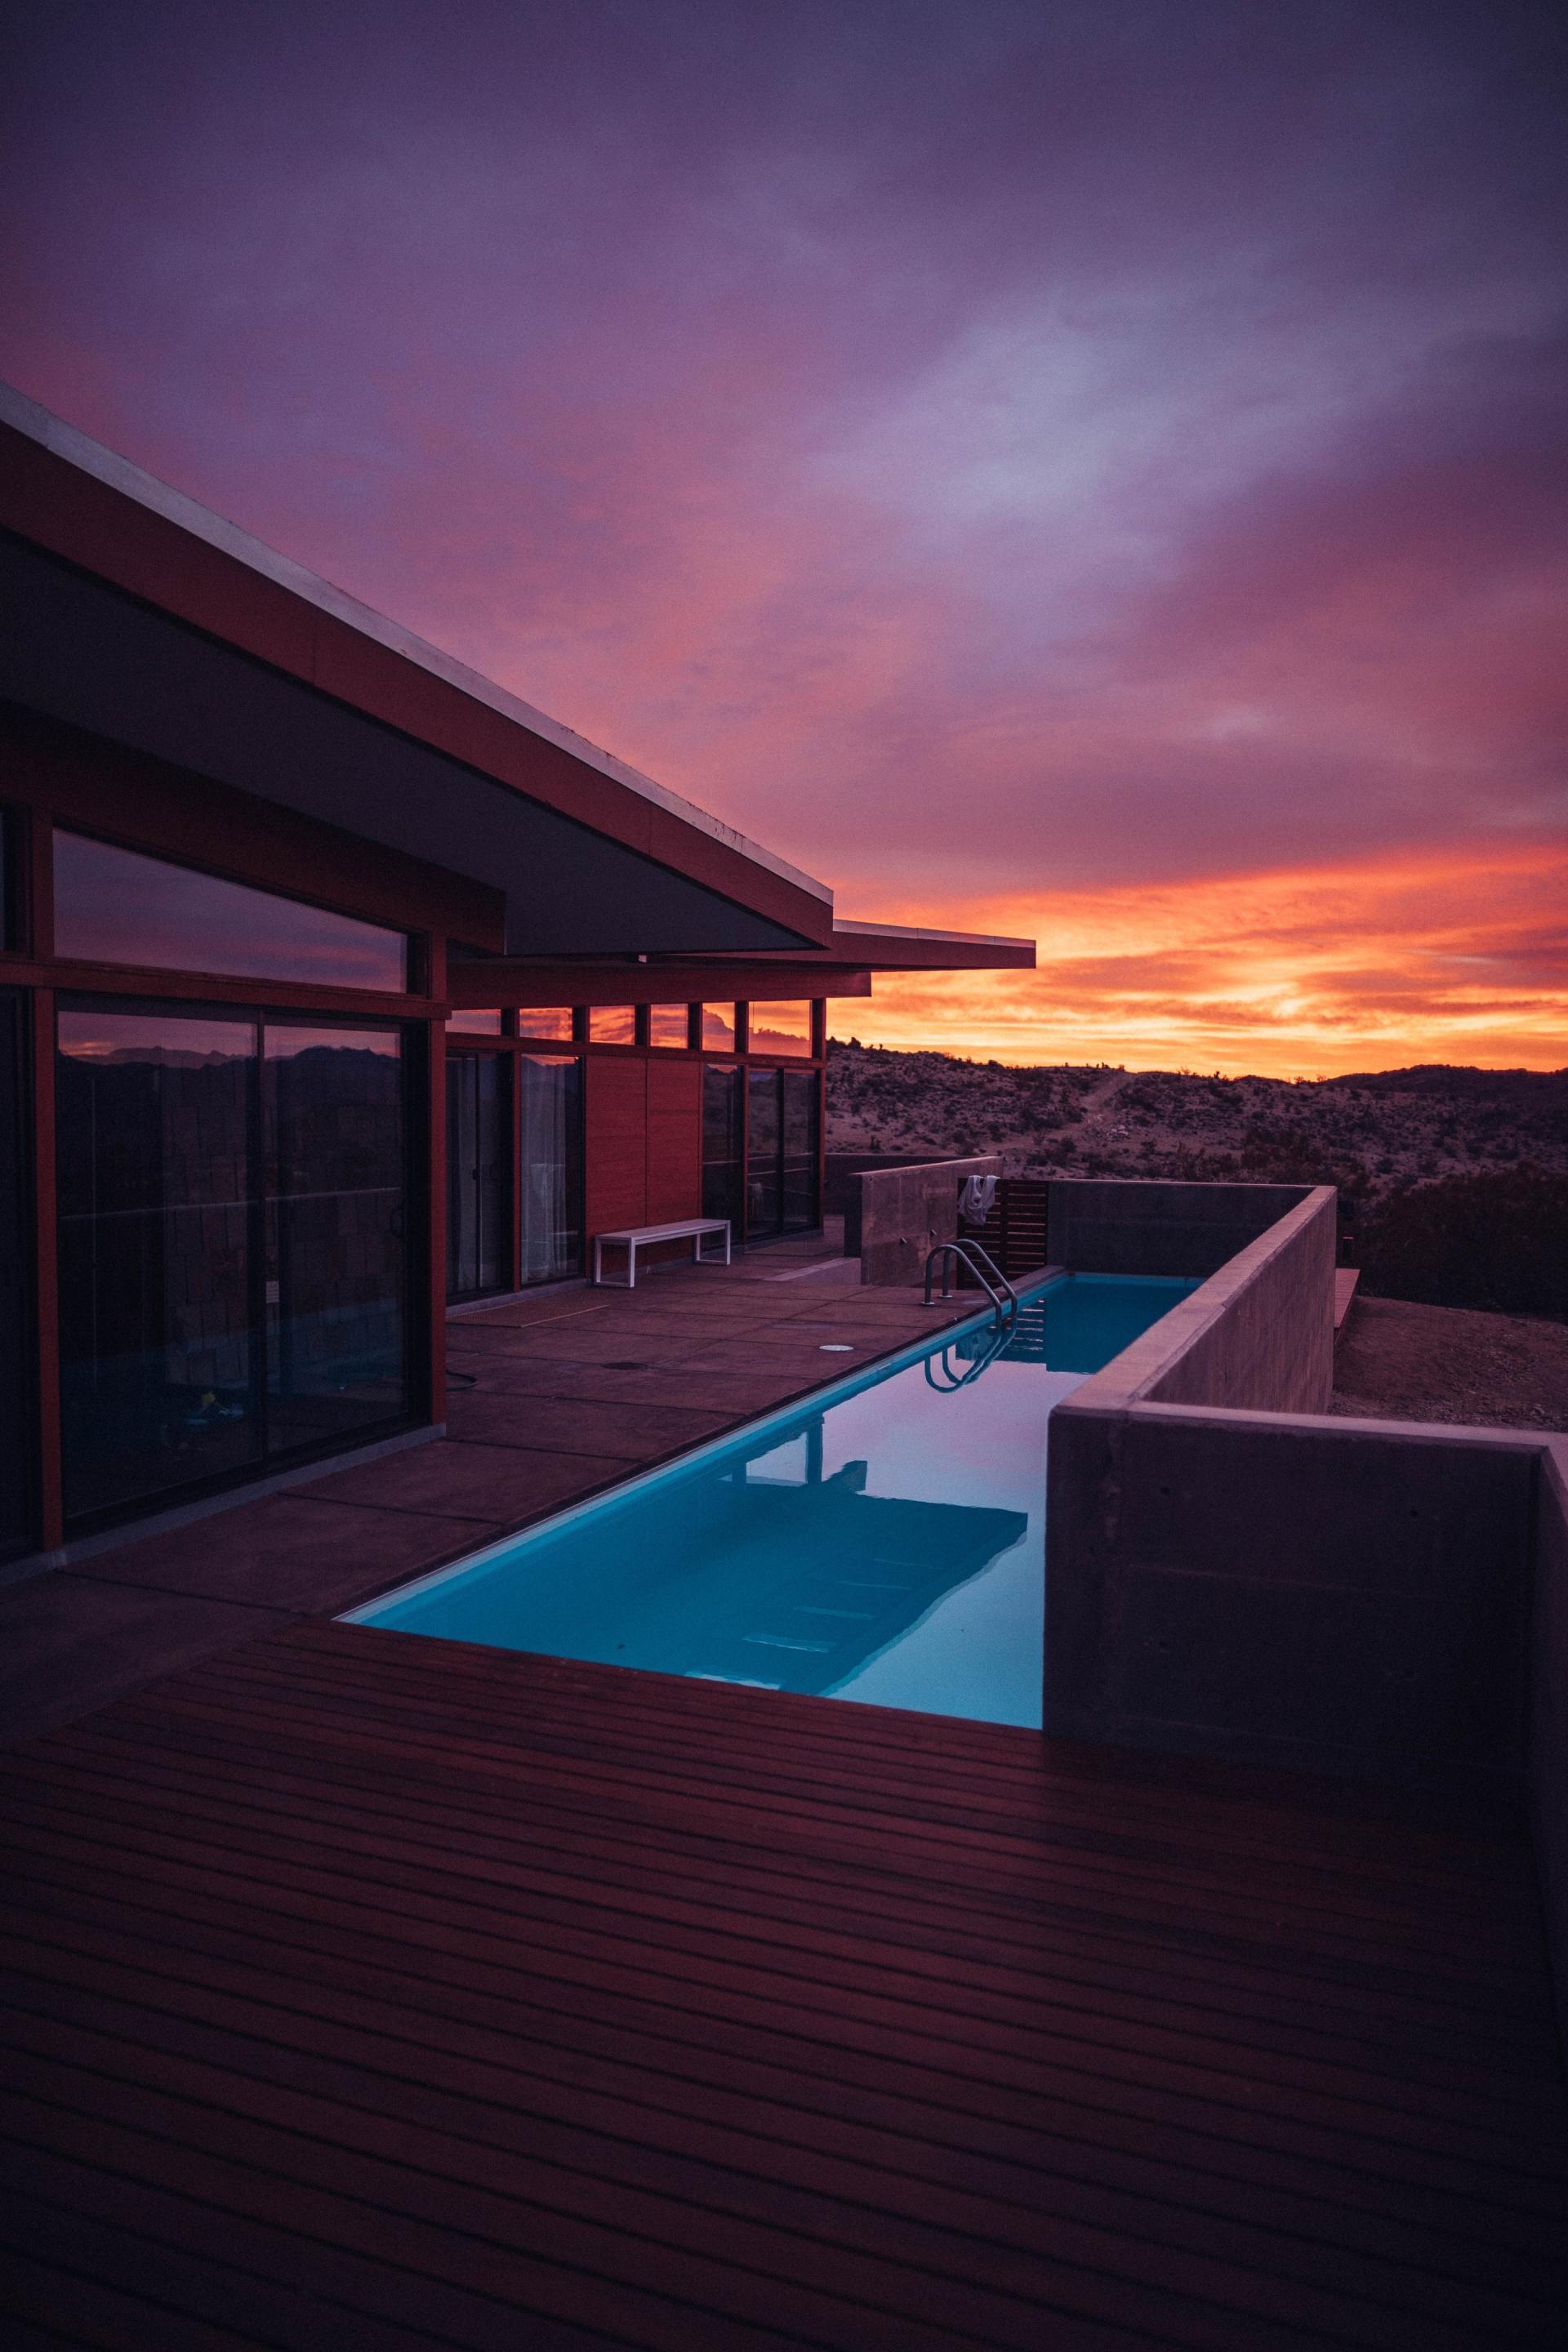 A house with a swimming pool in front of it at sunset.